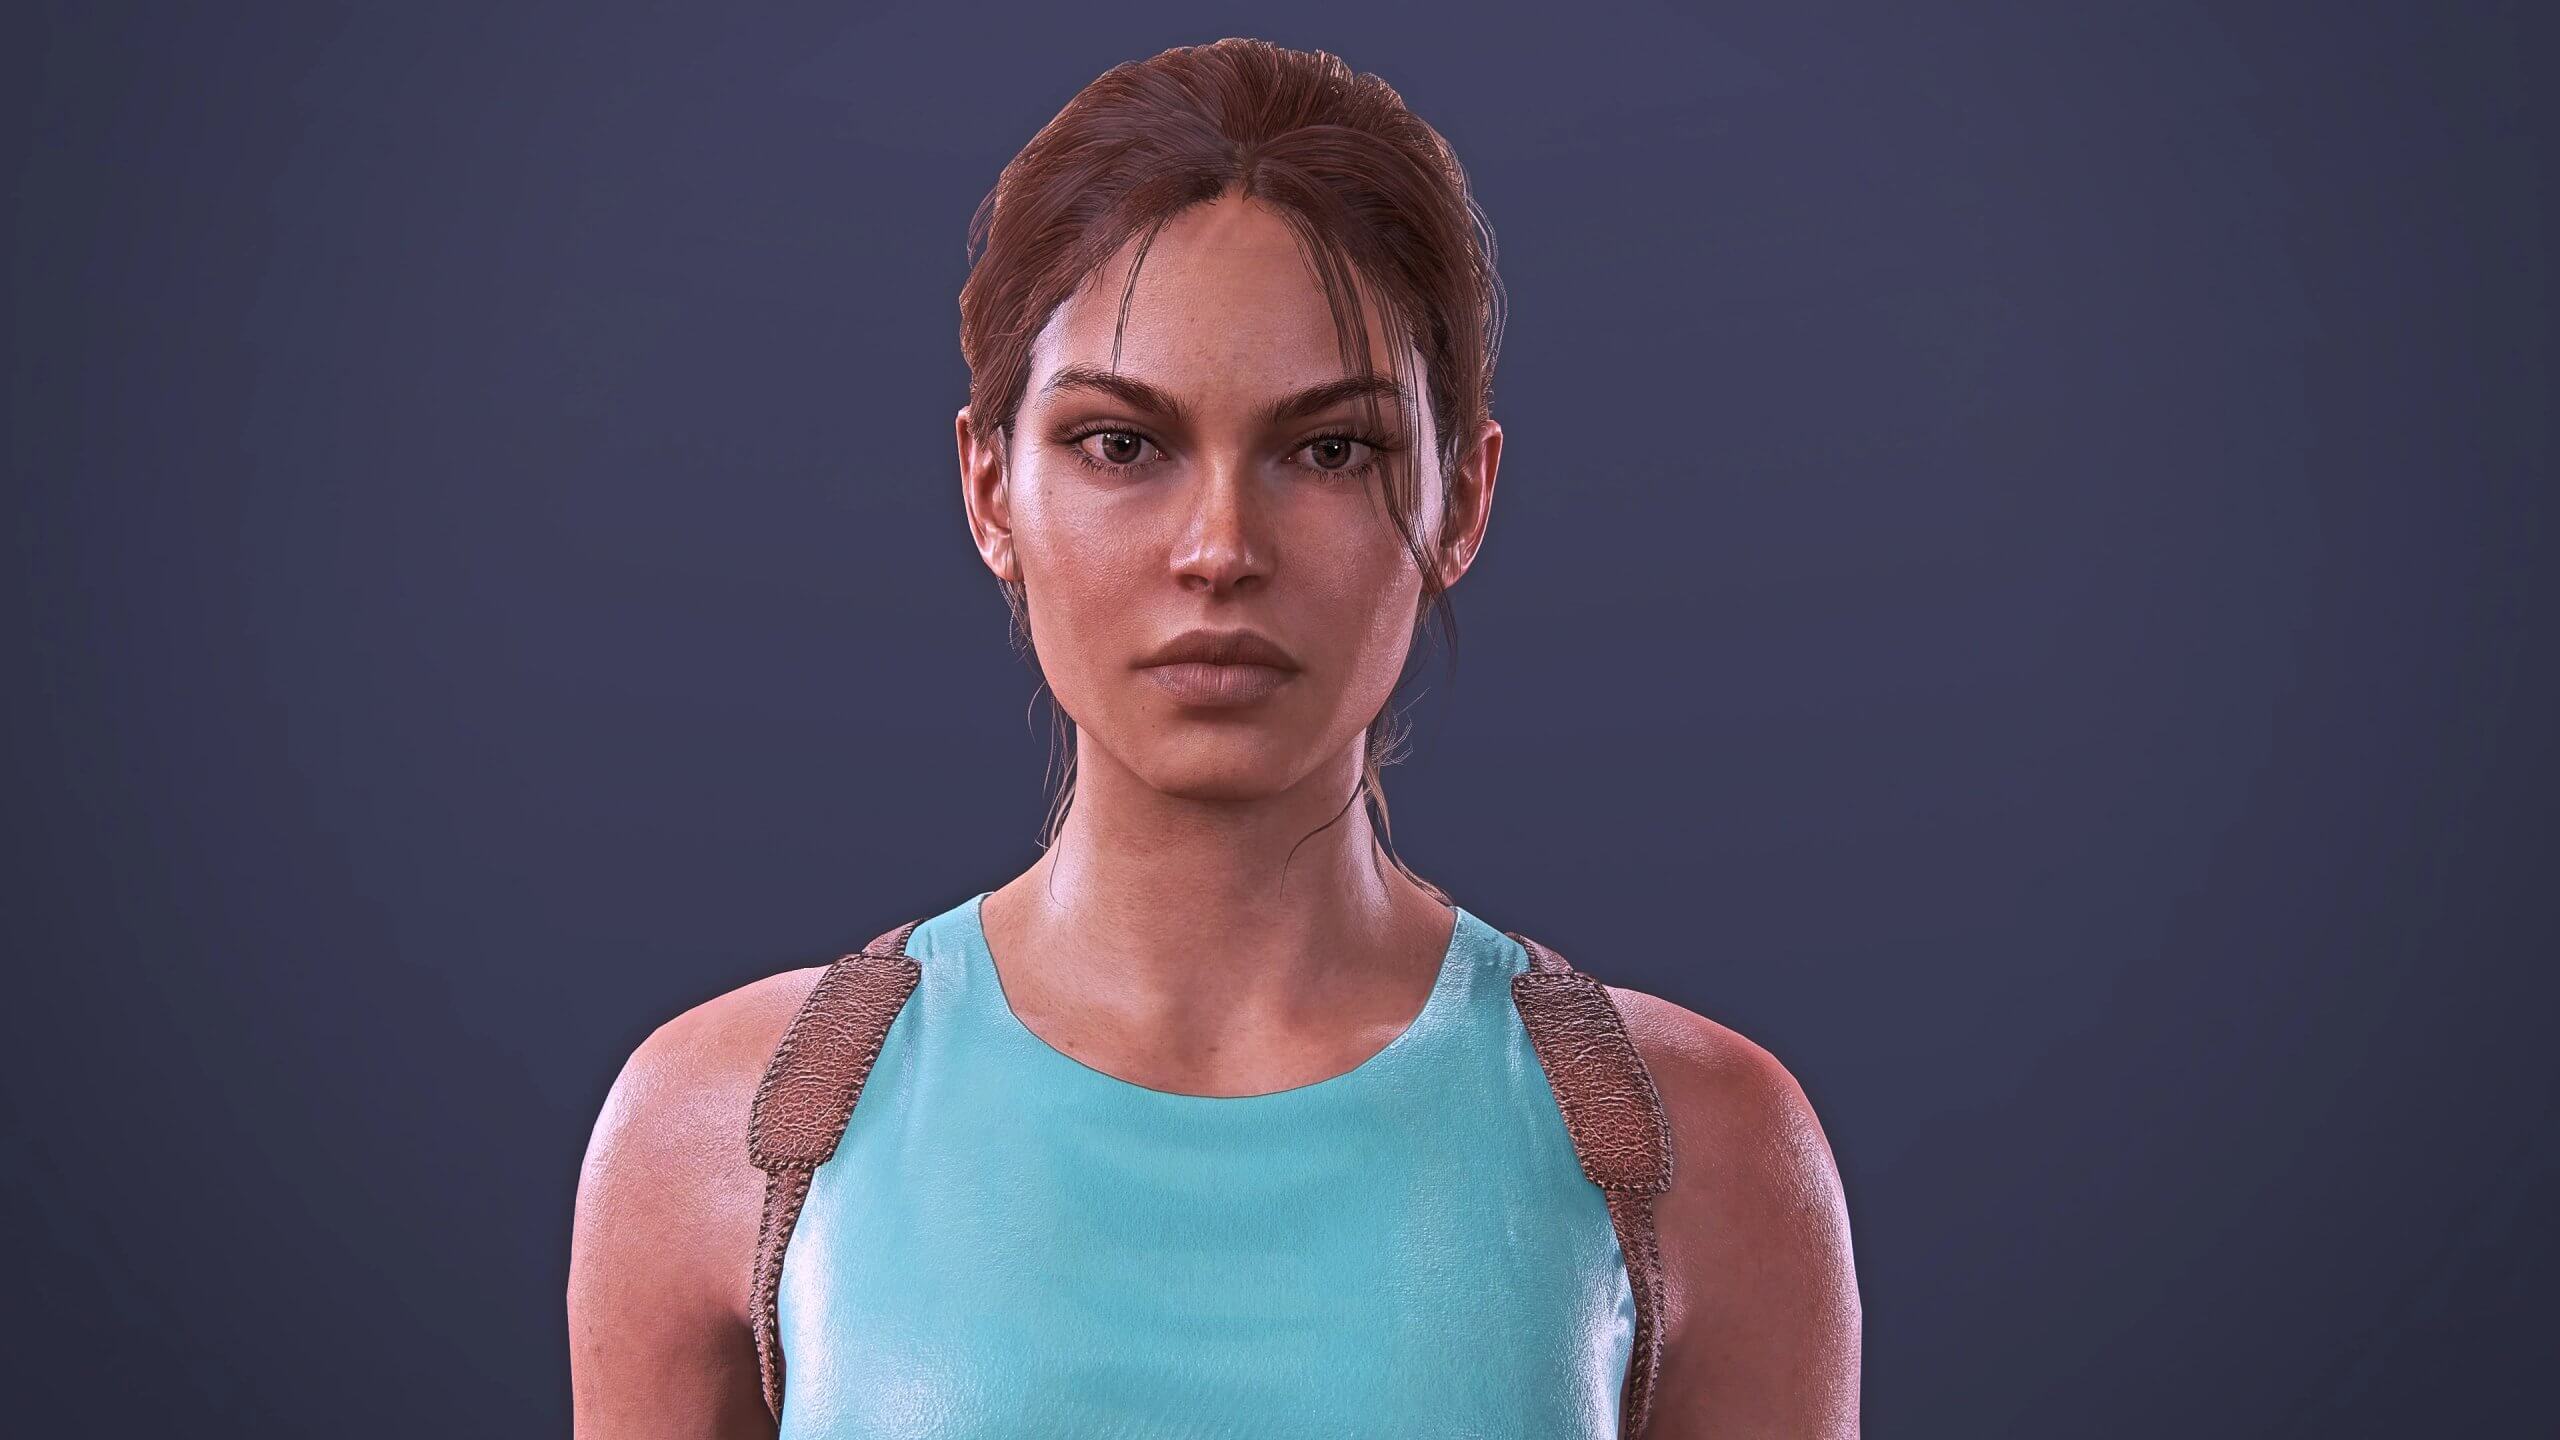 NEW LARA CROFT in TOMB RAIDER Lost Legacy looks ABSOLUTELY ULTRA